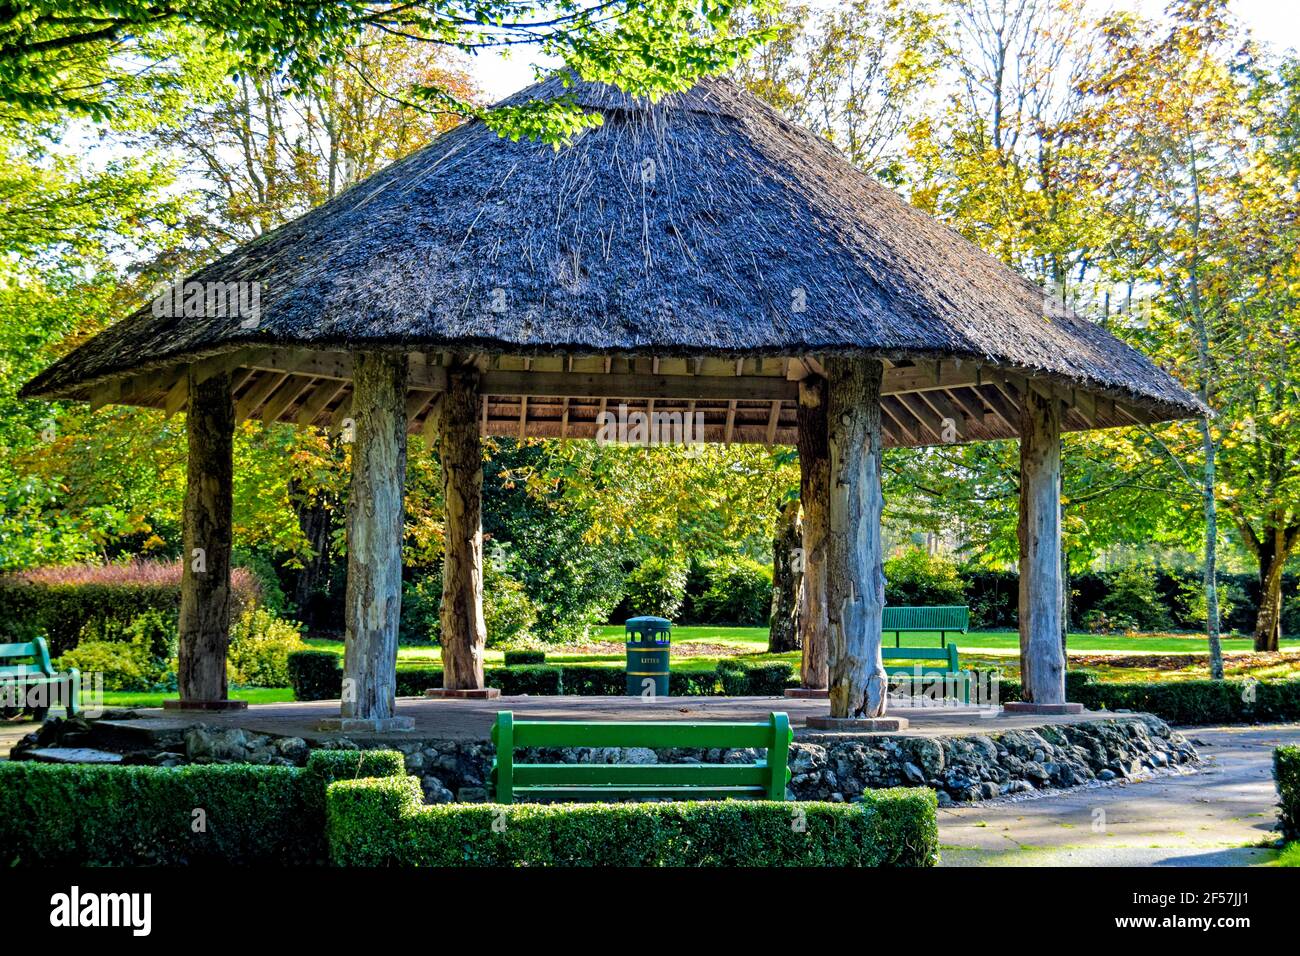 Thatched hut in the park of Adare, County Limerick, Ireland Stock Photo